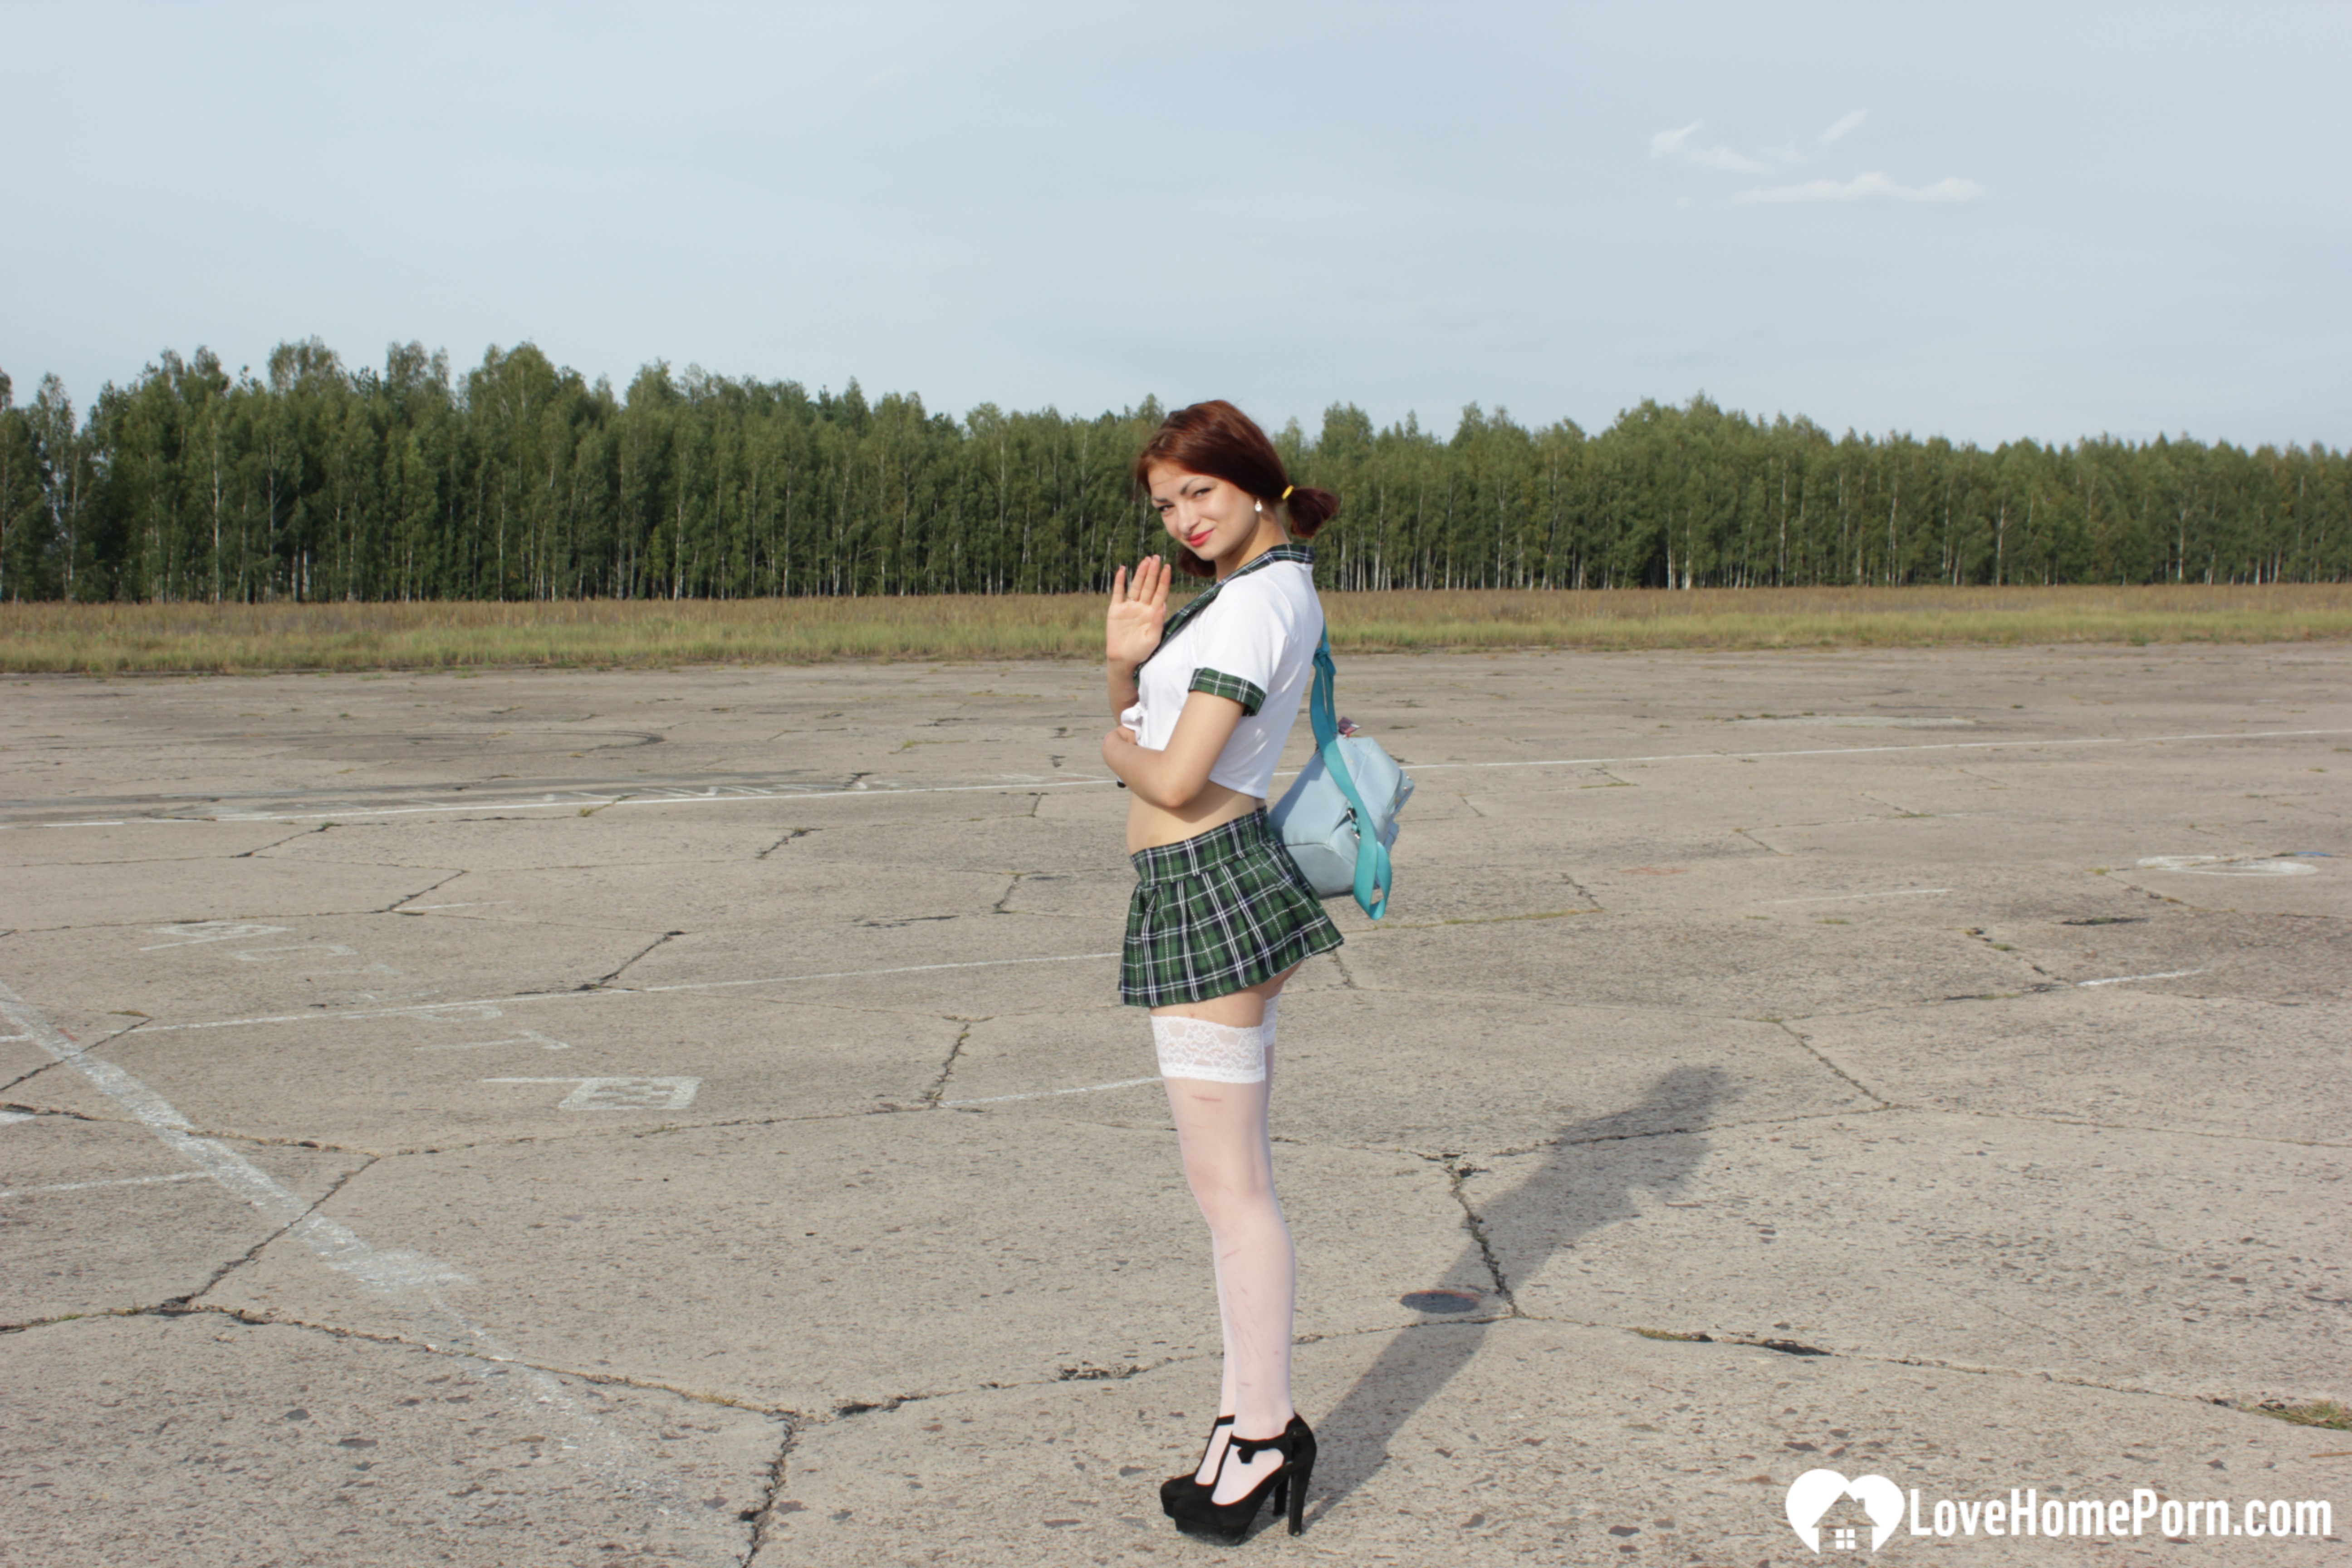 Incredible mom in a schoolgirl outfit posing outdoors